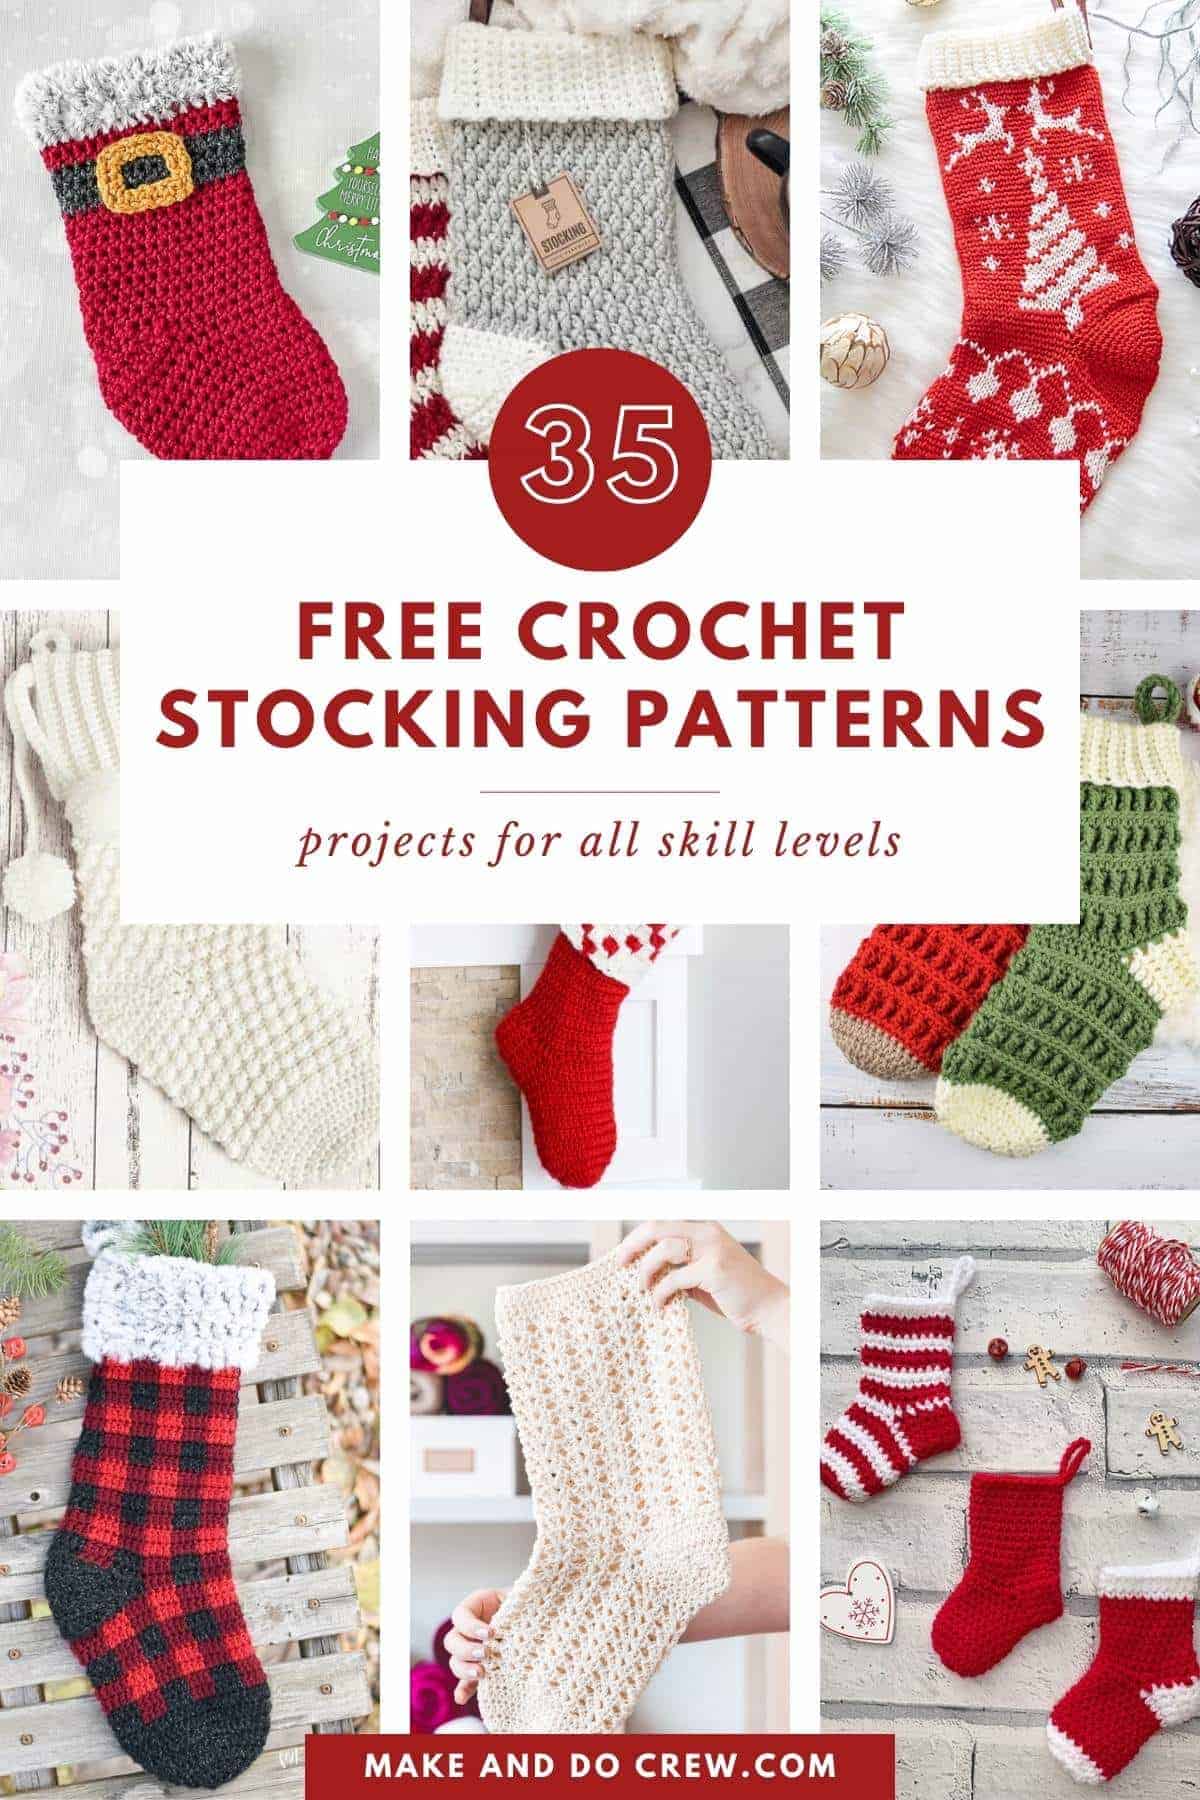 37 Easy Free Knitting Patterns for Gifts - An Oregon Cottage